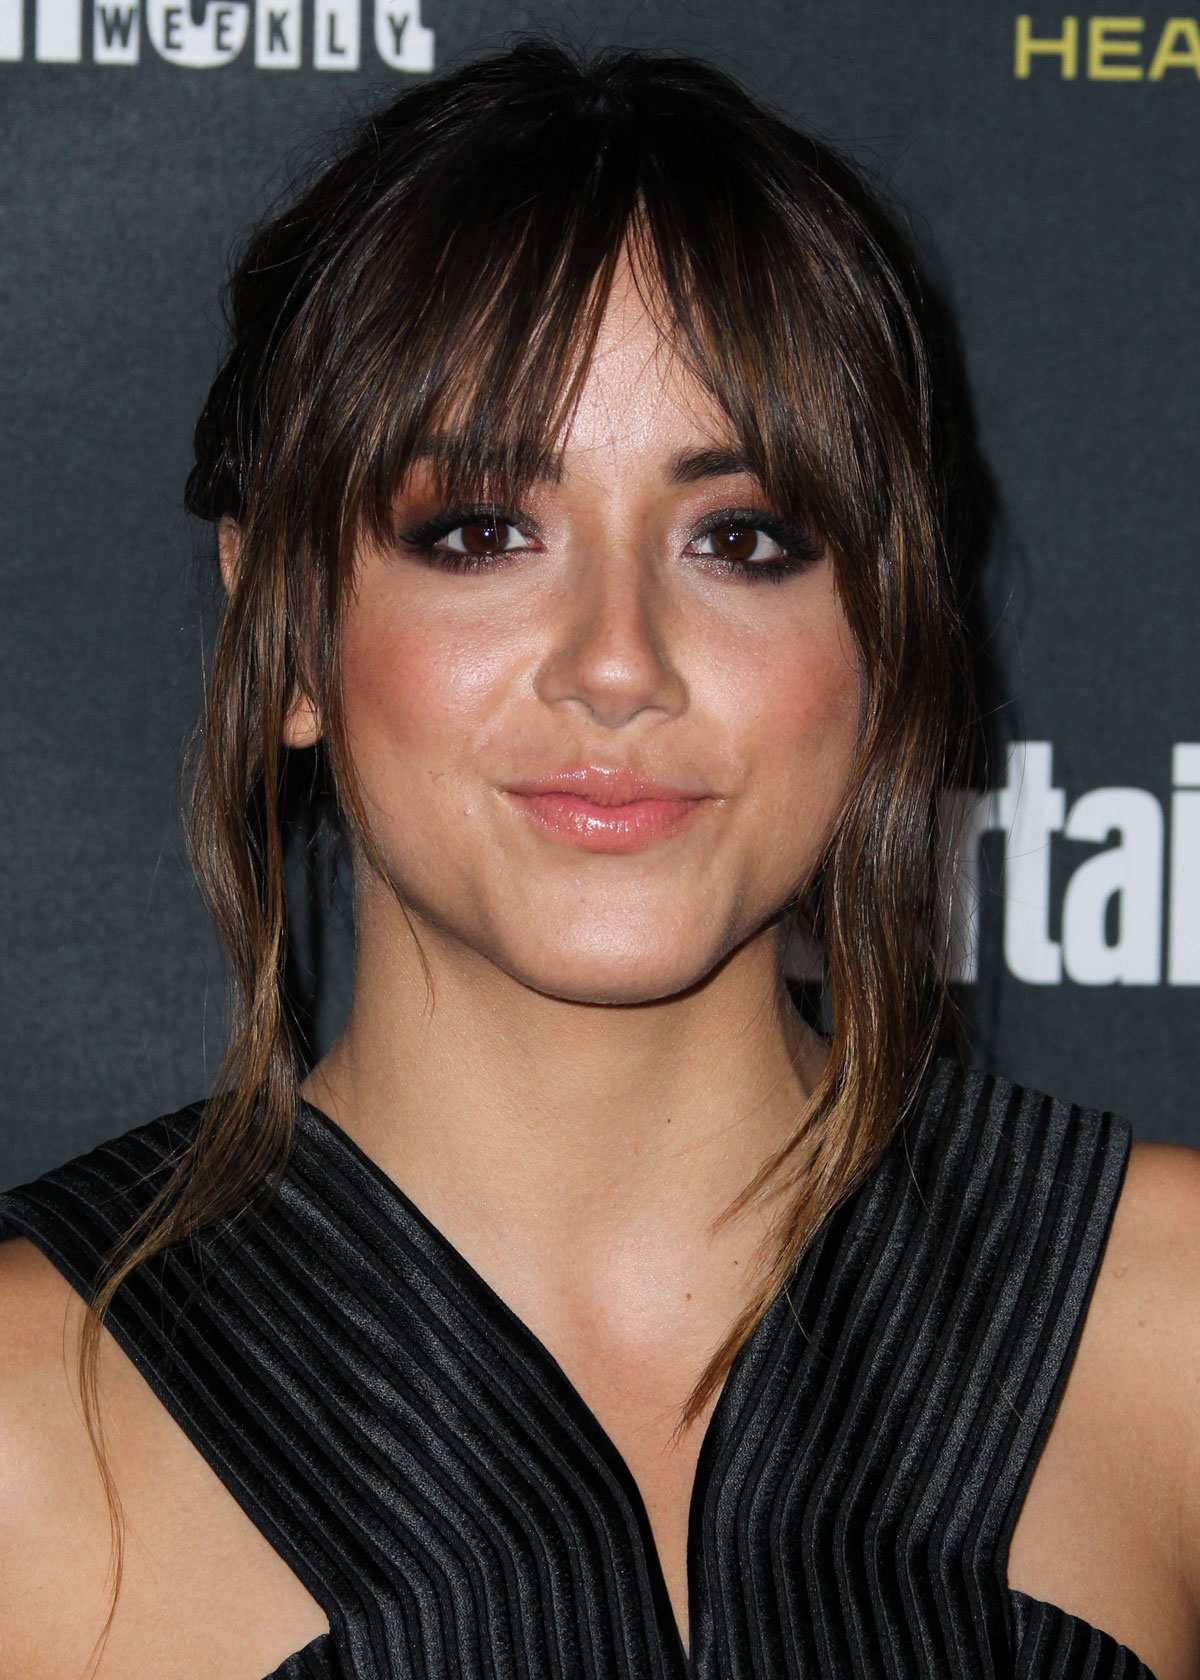 Chloe Bennet attends Entertainment Weekly’s Pre-Emmy Party